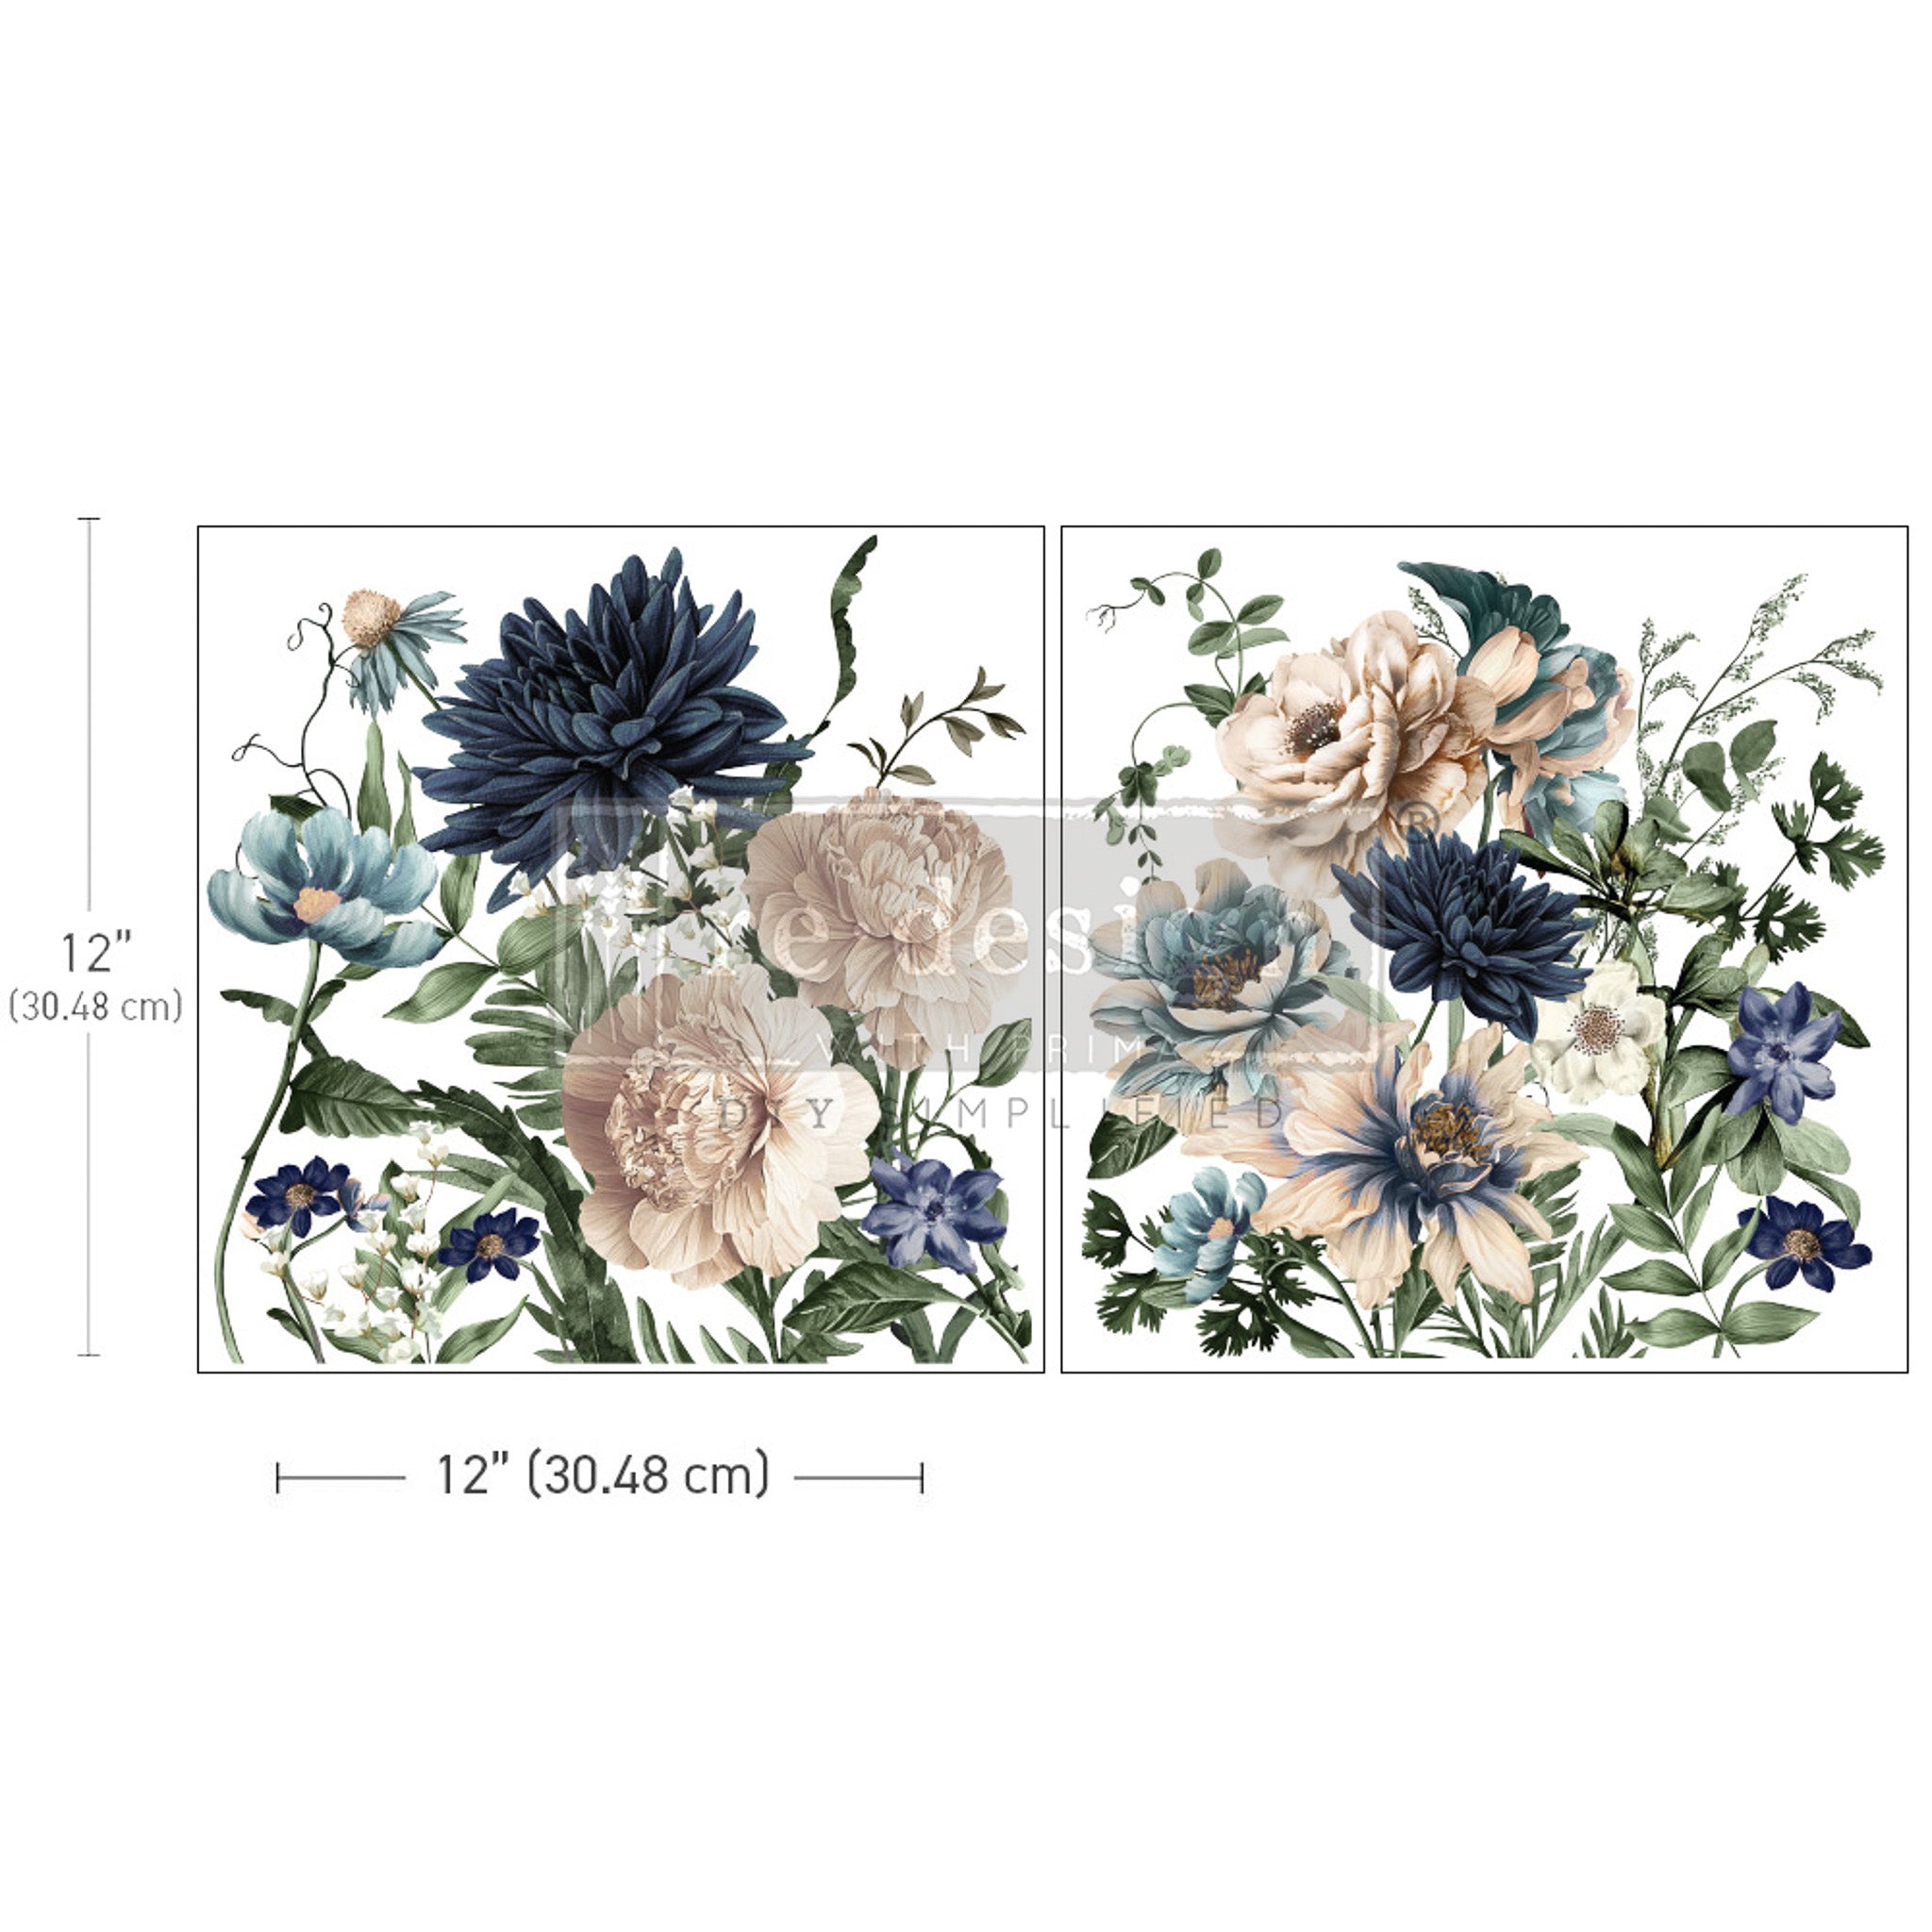 Two sheets of rub-on transfers featuring stunning floral designs in shades of light blue, navy, and blush. Measurements for 1 sheet reads 12" (30.48 cm) by 12" (30.48 cm).